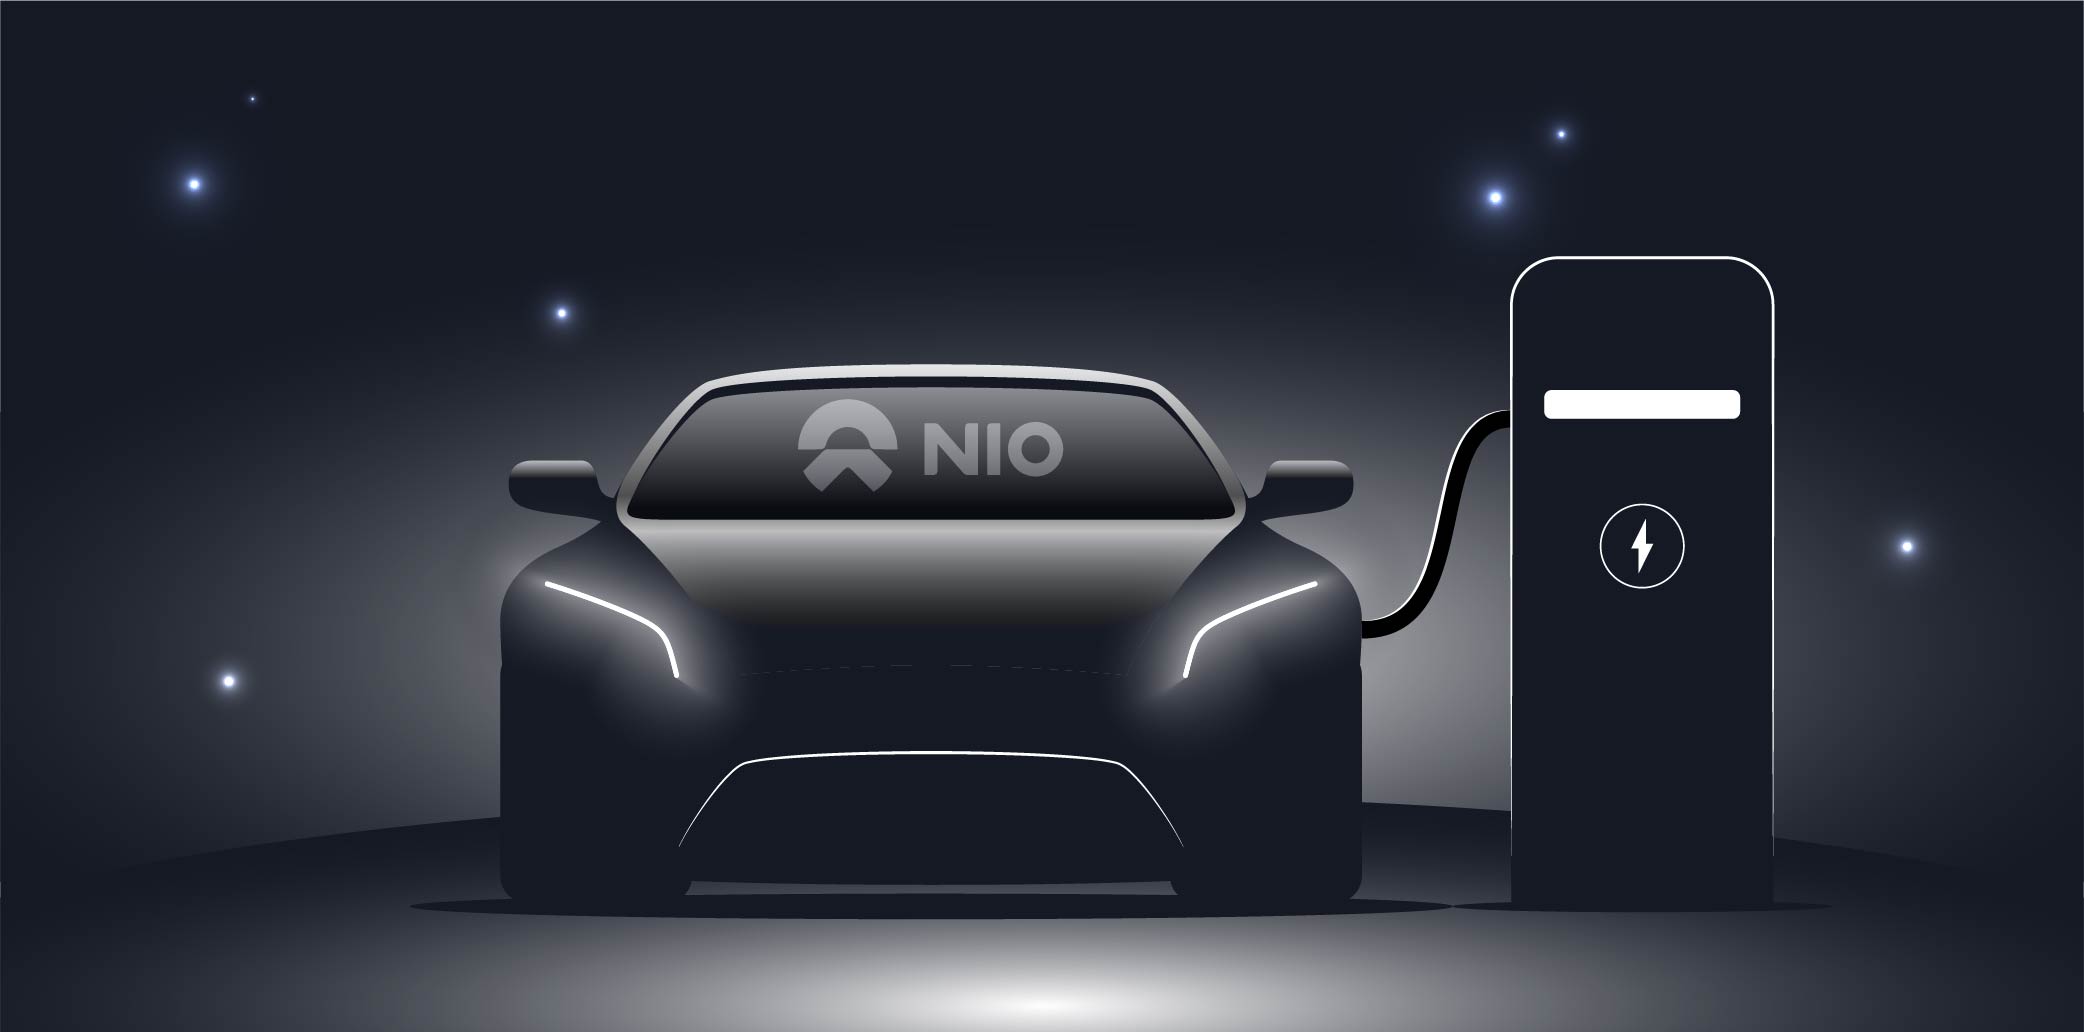 Nio narrows losses in Q2, plans launch for 3 new models despite chip shortage